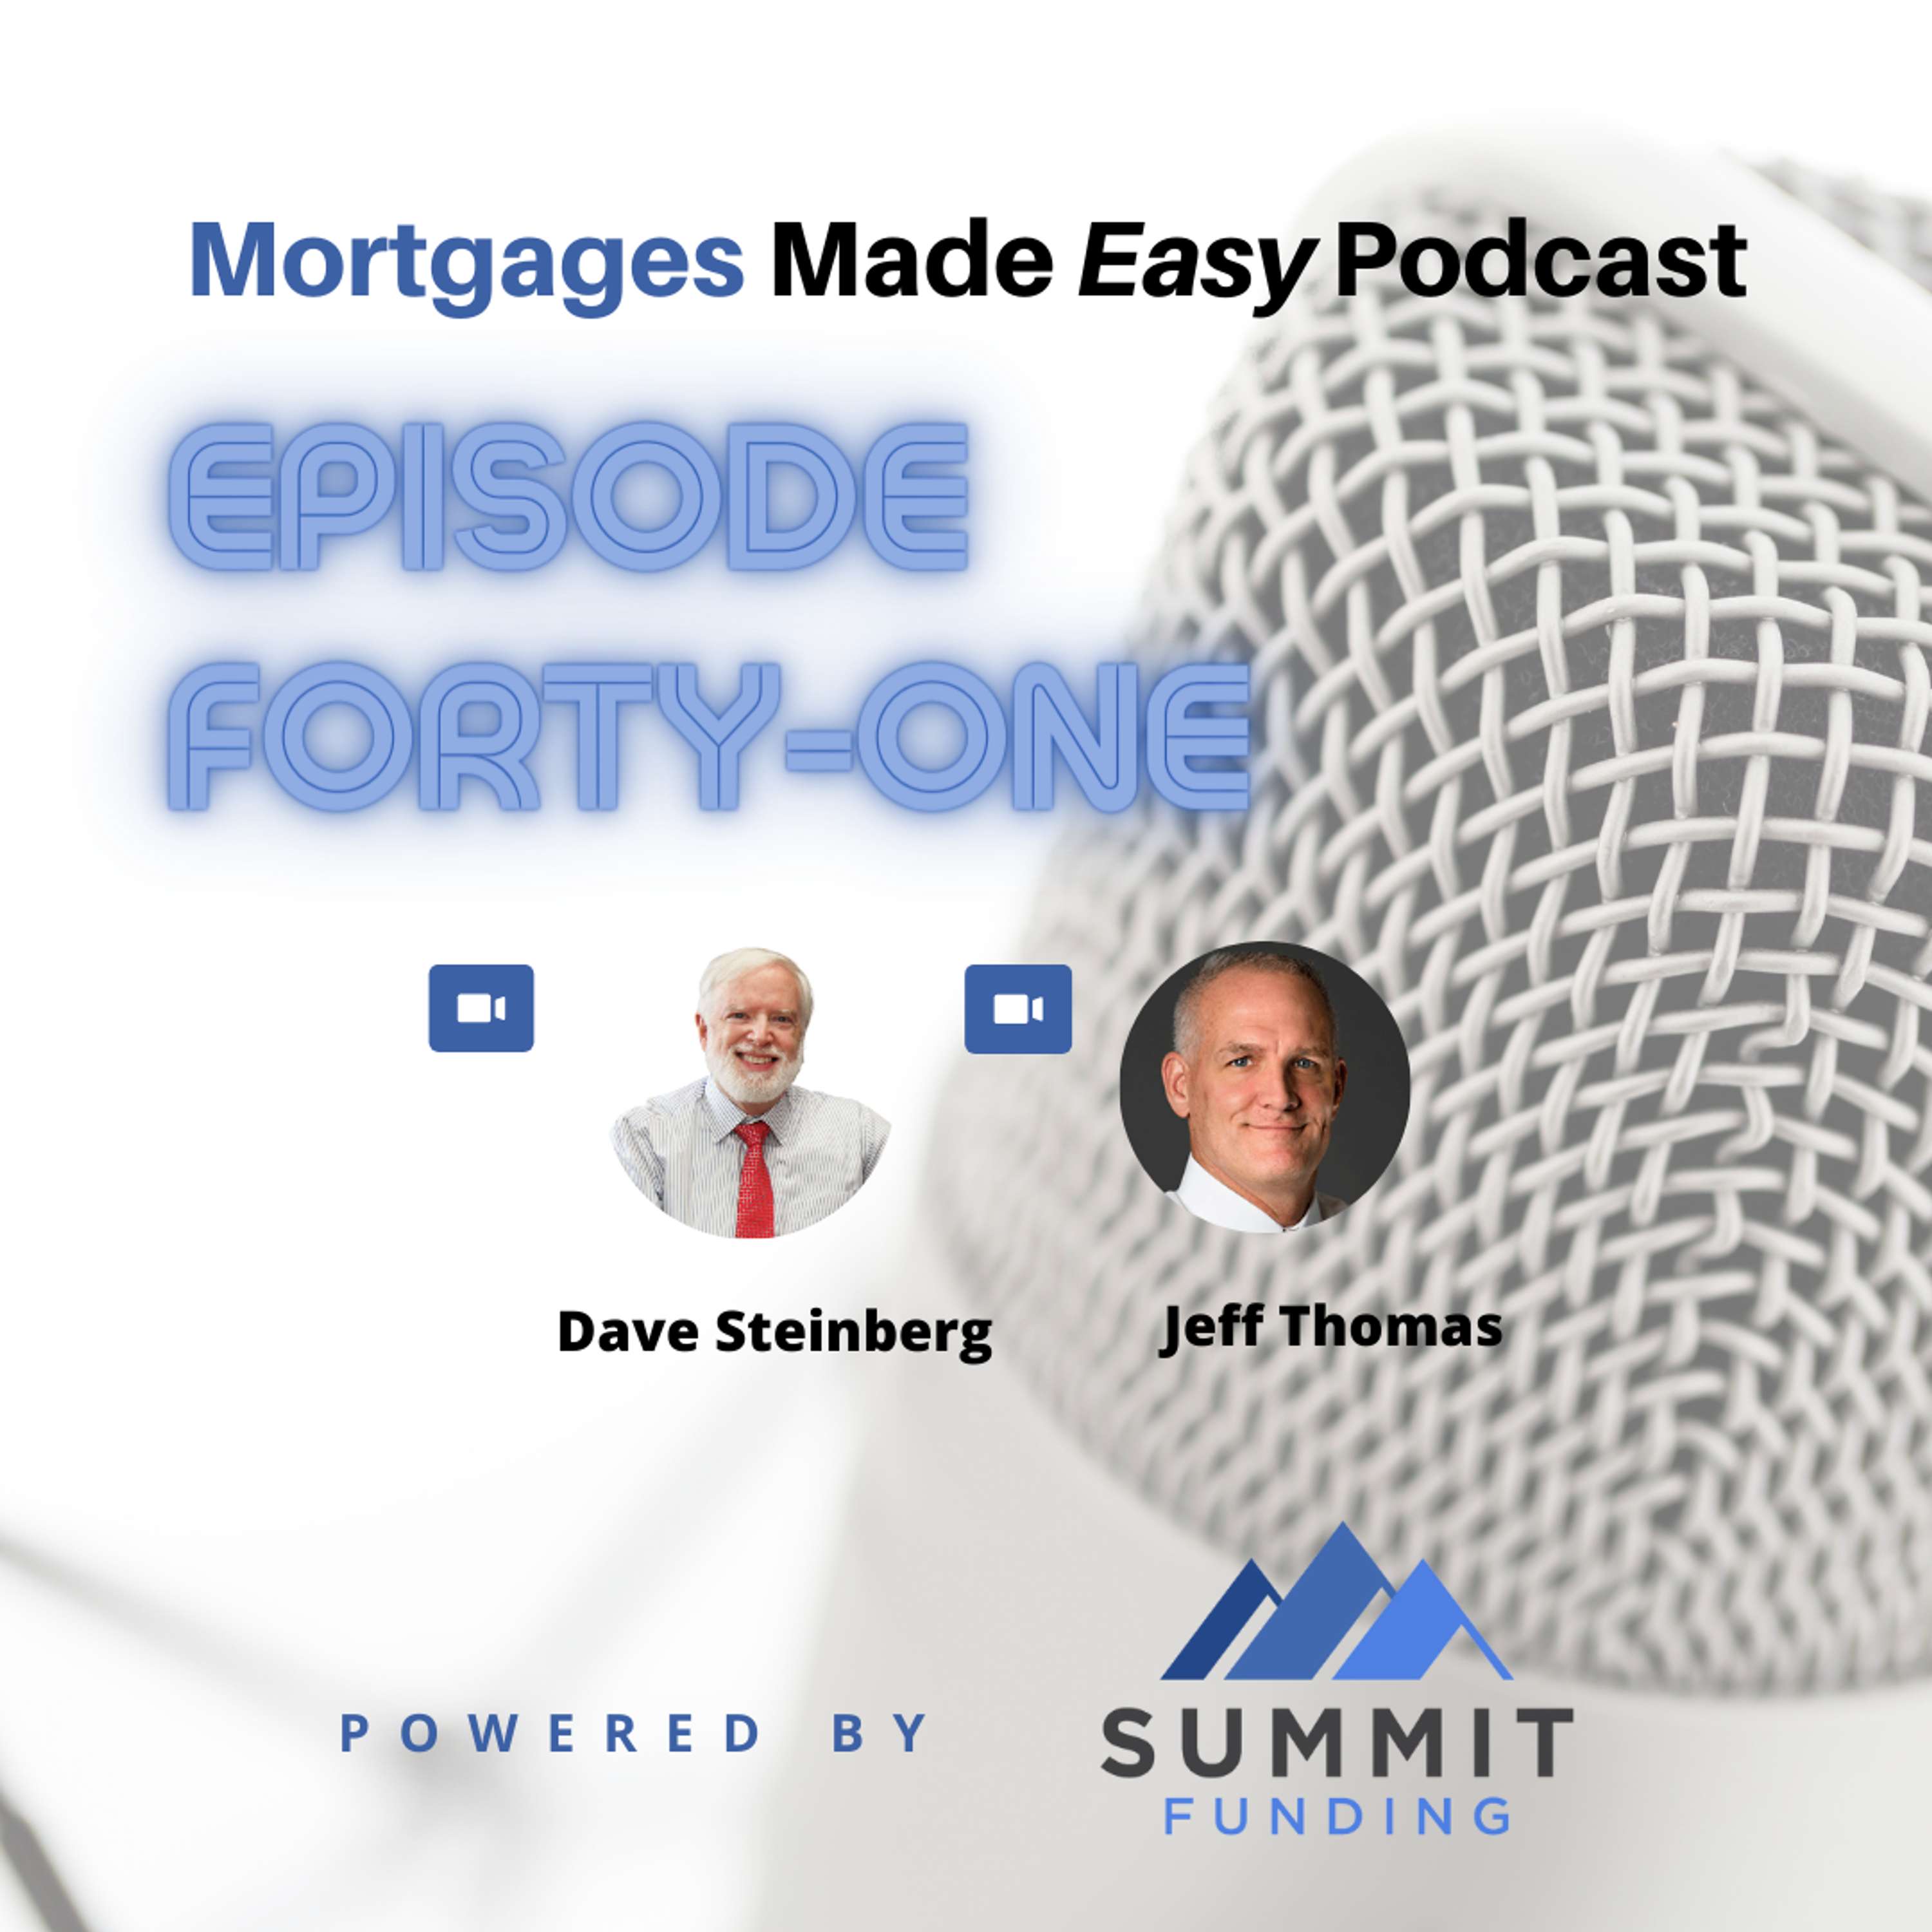 Episode 41: Large Downpayment: Interview with Jeff Thomas (Part 3)